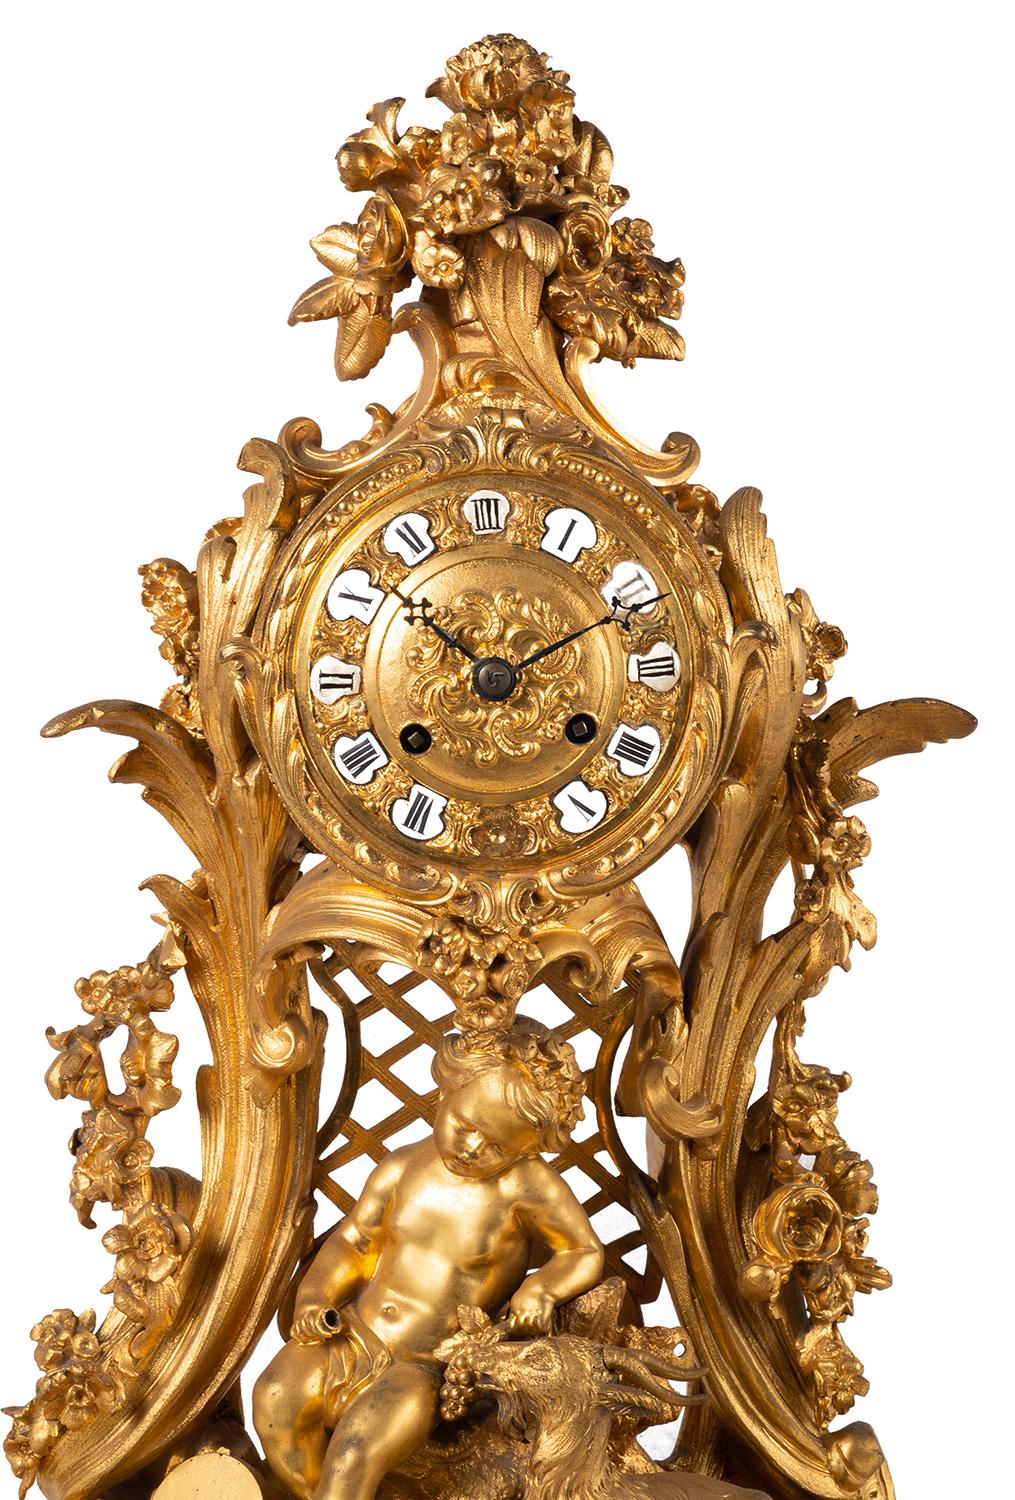 A very good quality 19th Century French gilded ormolu Rococo influenced mantel clock, having wonderful scrolling foliate decoration, the clock face having enamel Roman numerals, an eight day duration movement that strikes on the hour and half hour,